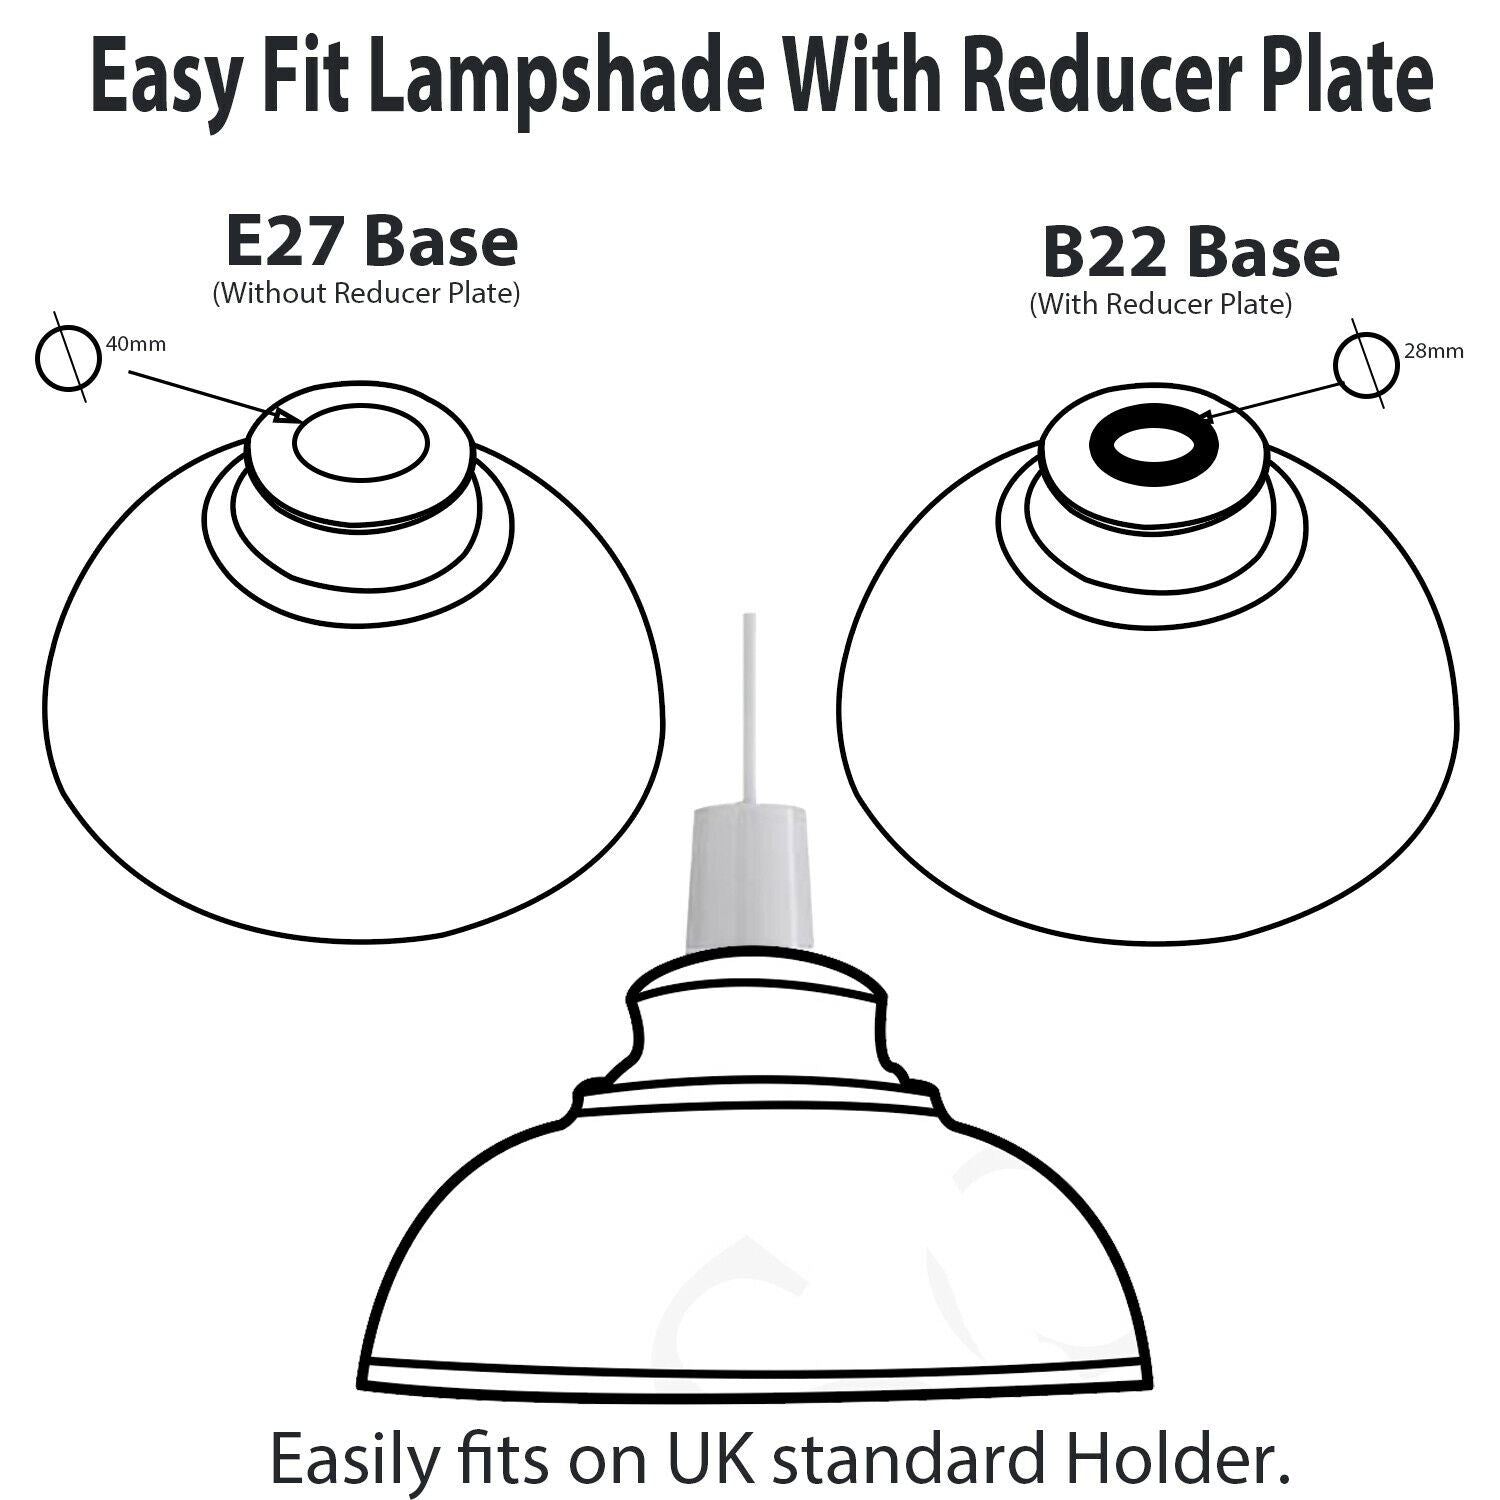 Easy fit pendant lampshade